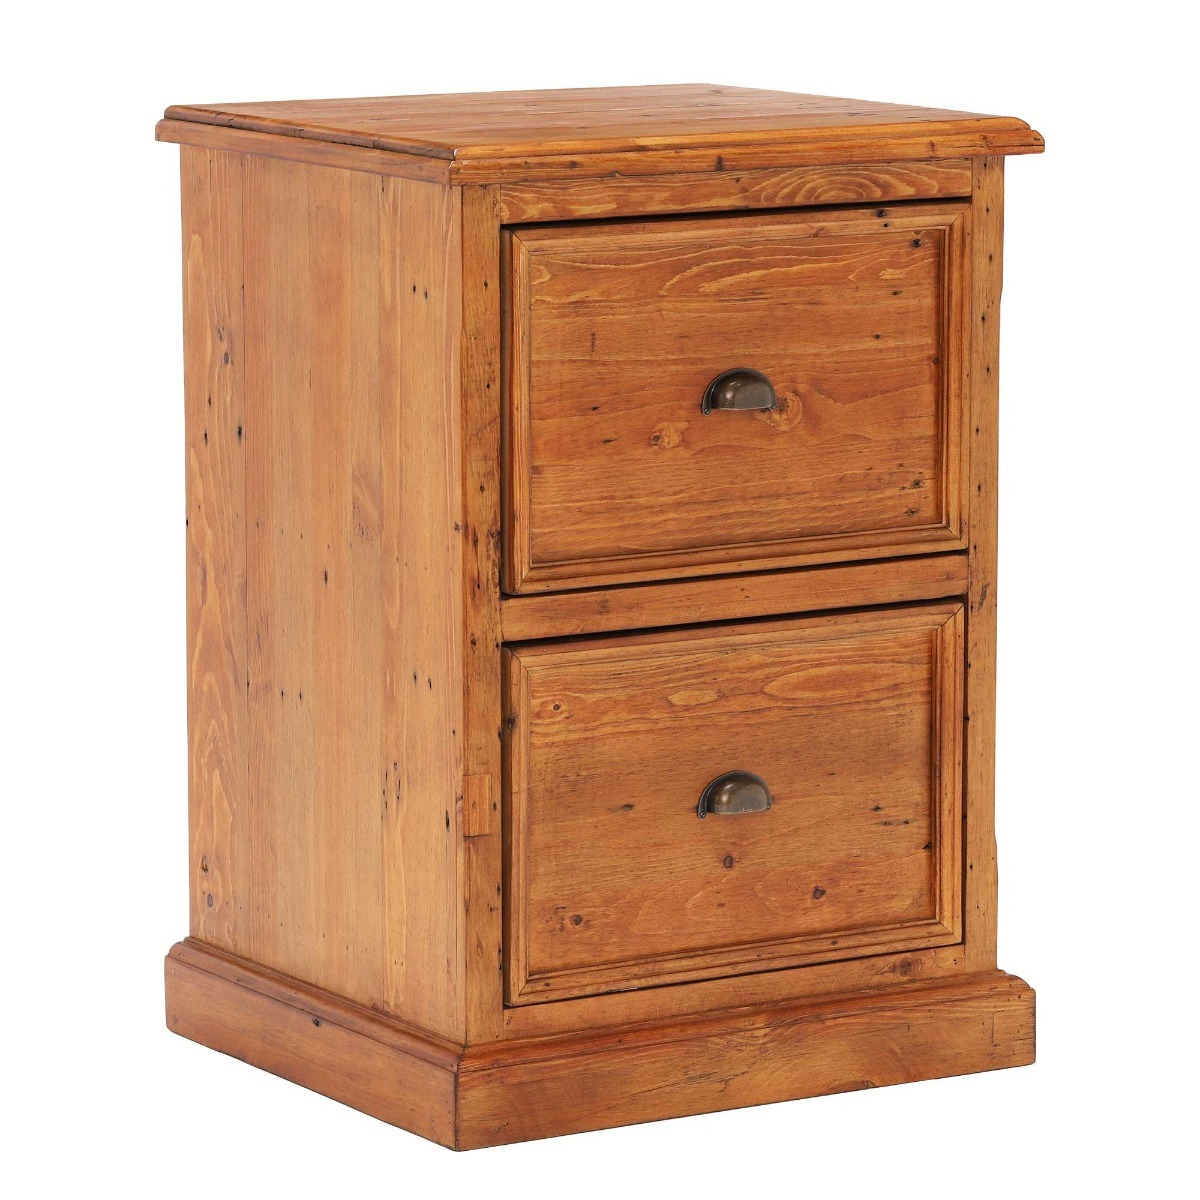 Villiers 2 Drawer Filing Cabinet, Pine Wood - Barker & Stonehouse - image 1